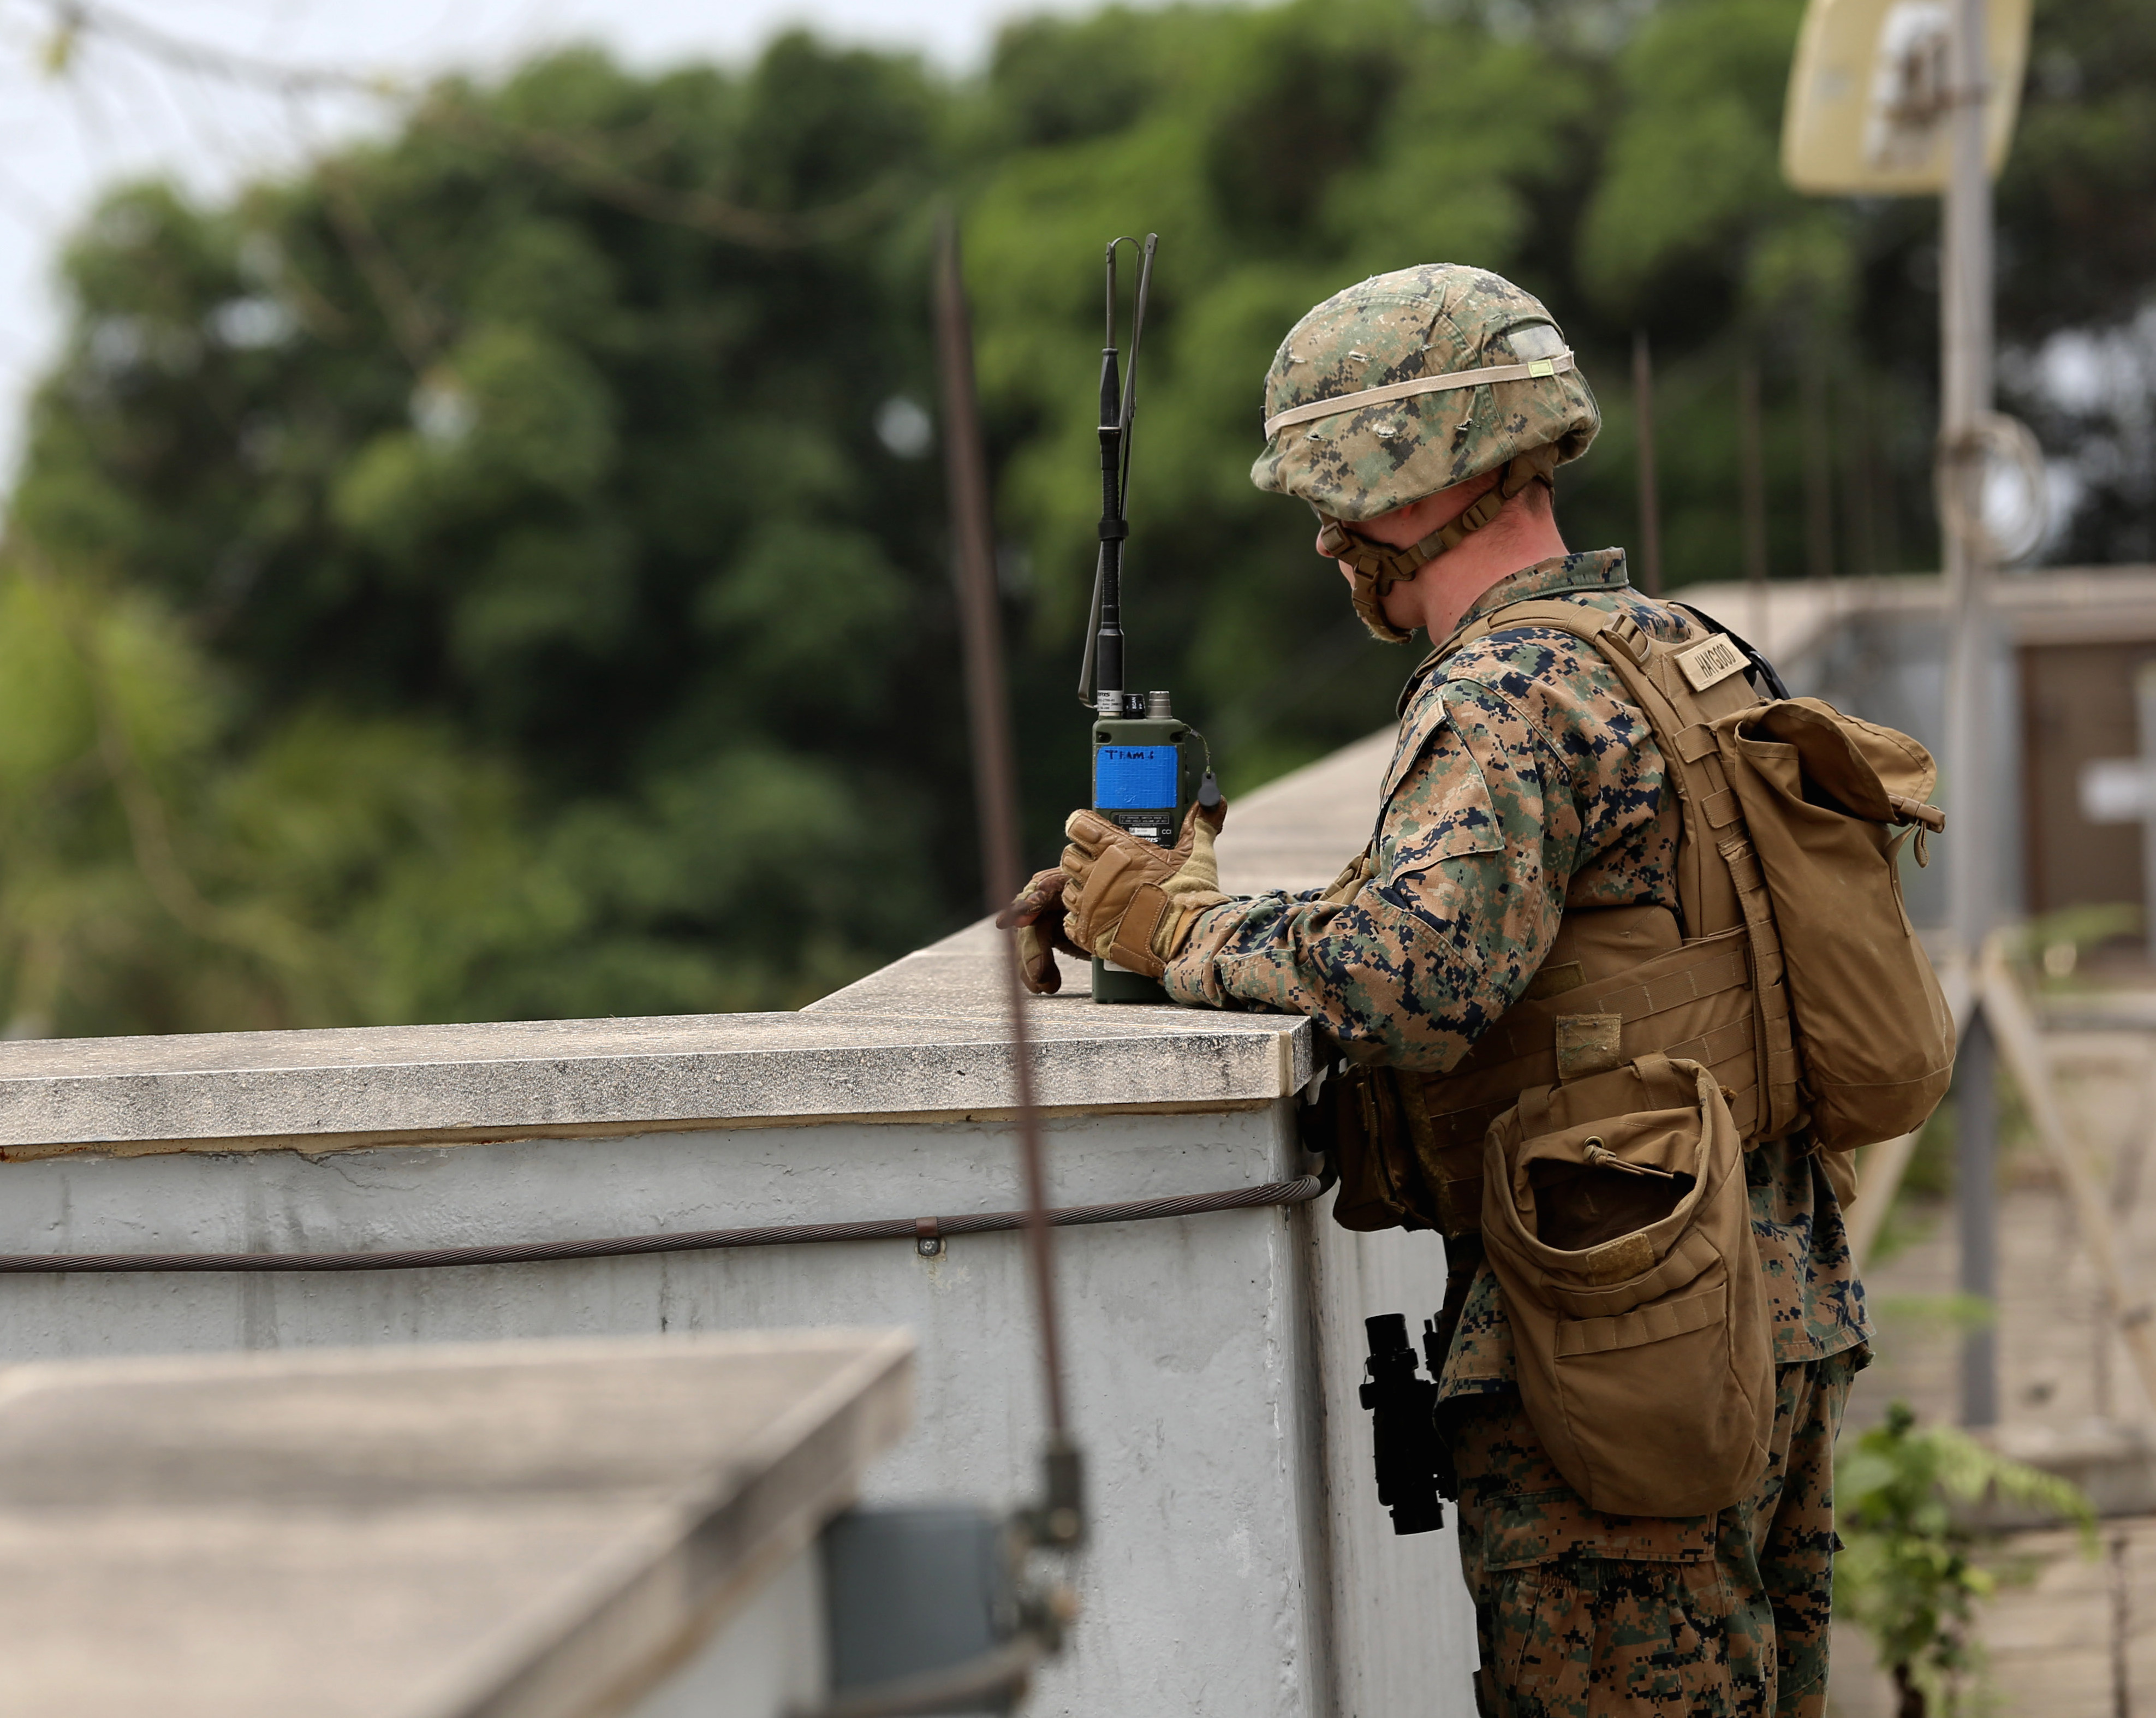 A Marine provides an over watch for Marines conducting vehicle inspections at the American Embassy in Monrovia, Liberia, during a training exercise March 7, 2014. US Marine Corps Photo